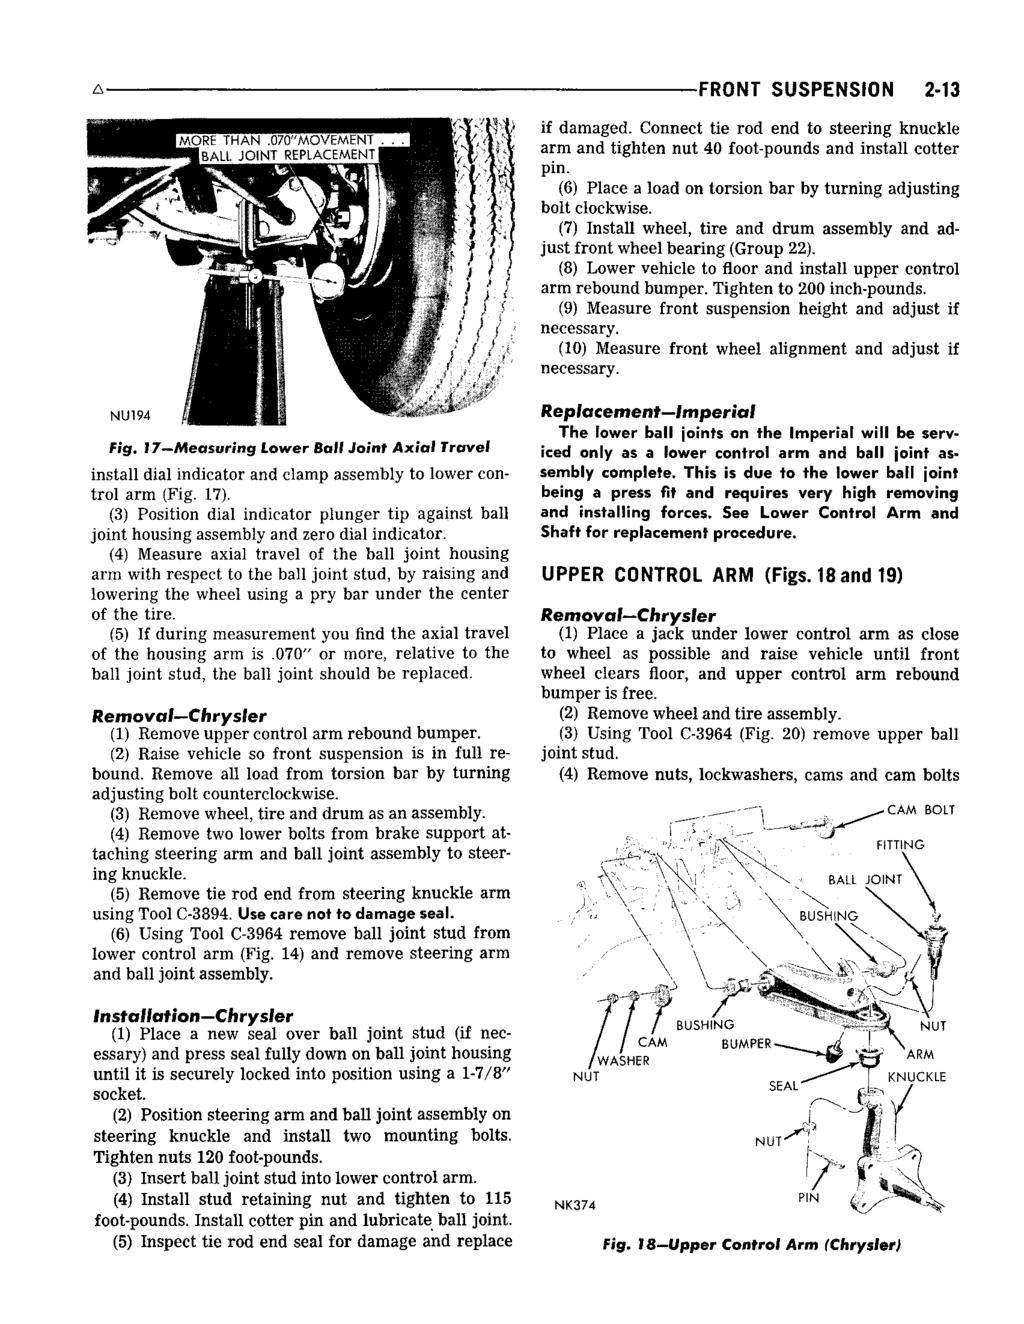 A FRONT SUSPENSION 2-13 if damaged. Connect tie rod end to steering knuckle arm and tighten nut 40 foot-pounds and install cotter pin.